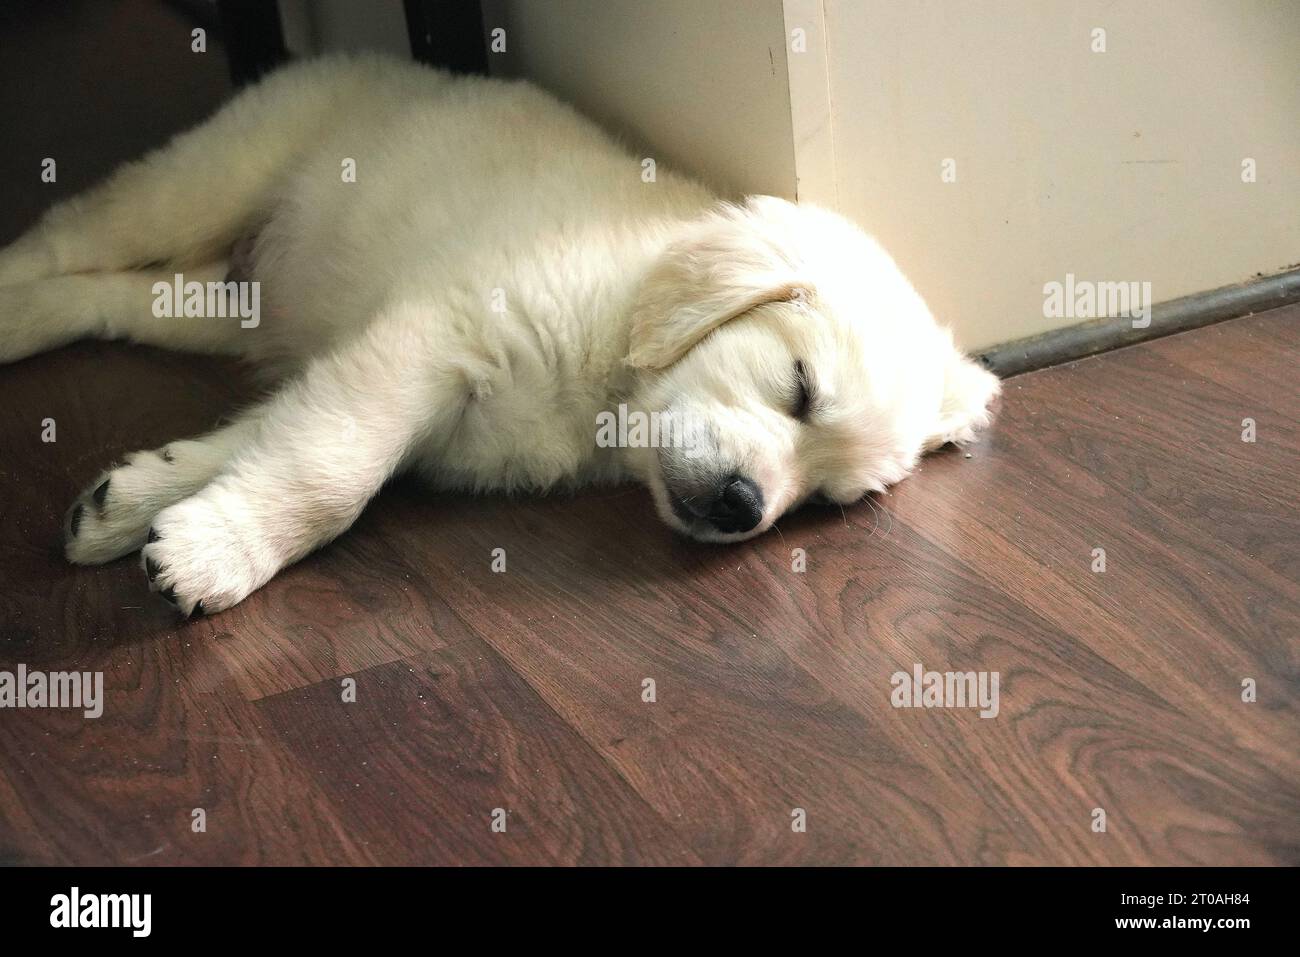 Adorable English Cream Golden Retriever Puppy Sleeping After a Long Day of Playing Stock Photo